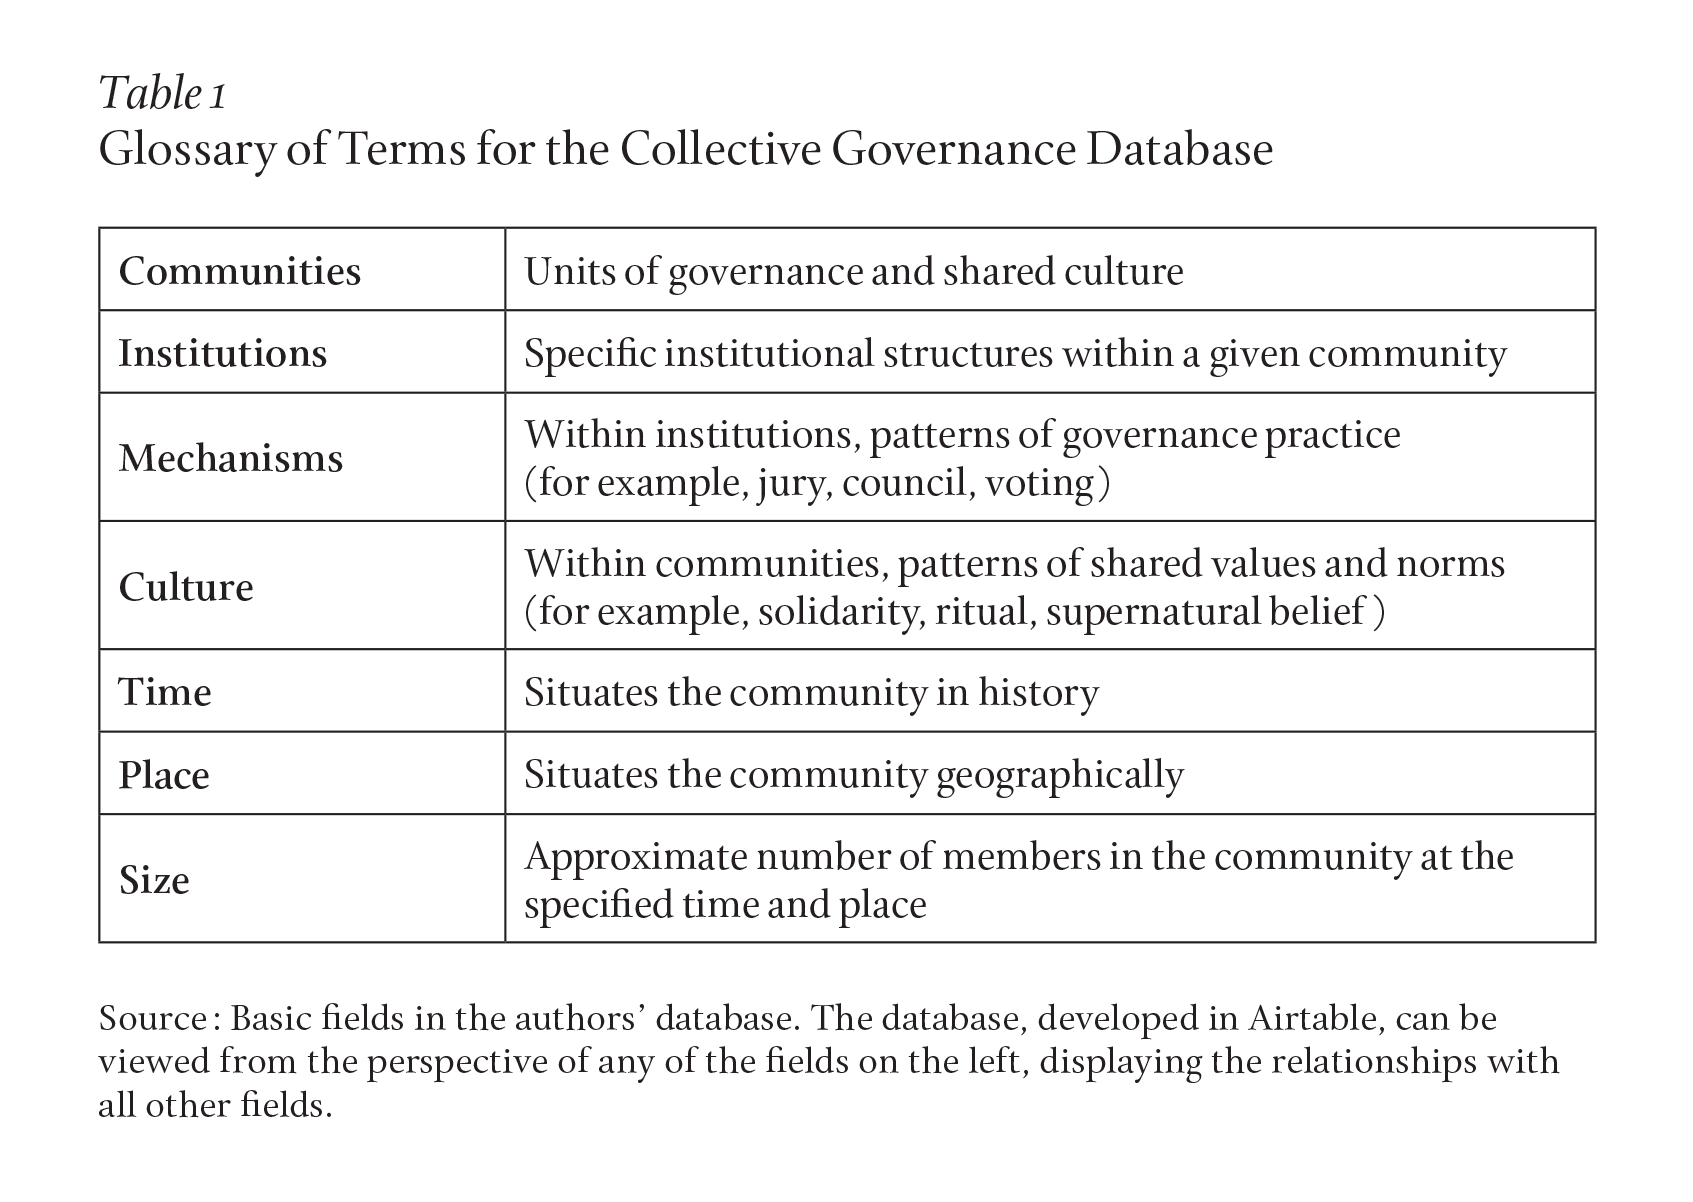 Table text: Communities: Units of governance and shared culture; Institutions: Specific institutional structures within a given community; Mechanisms: Within institutions, patterns of governance practice (for example, jury, council, voting); Culture: Within communities, patterns of shared values and norms (for example, solidarity, ritual, supernatural belief); Time: Situates the community in history; Place: Situates the community geographically; Size: Approximate number of members in the community